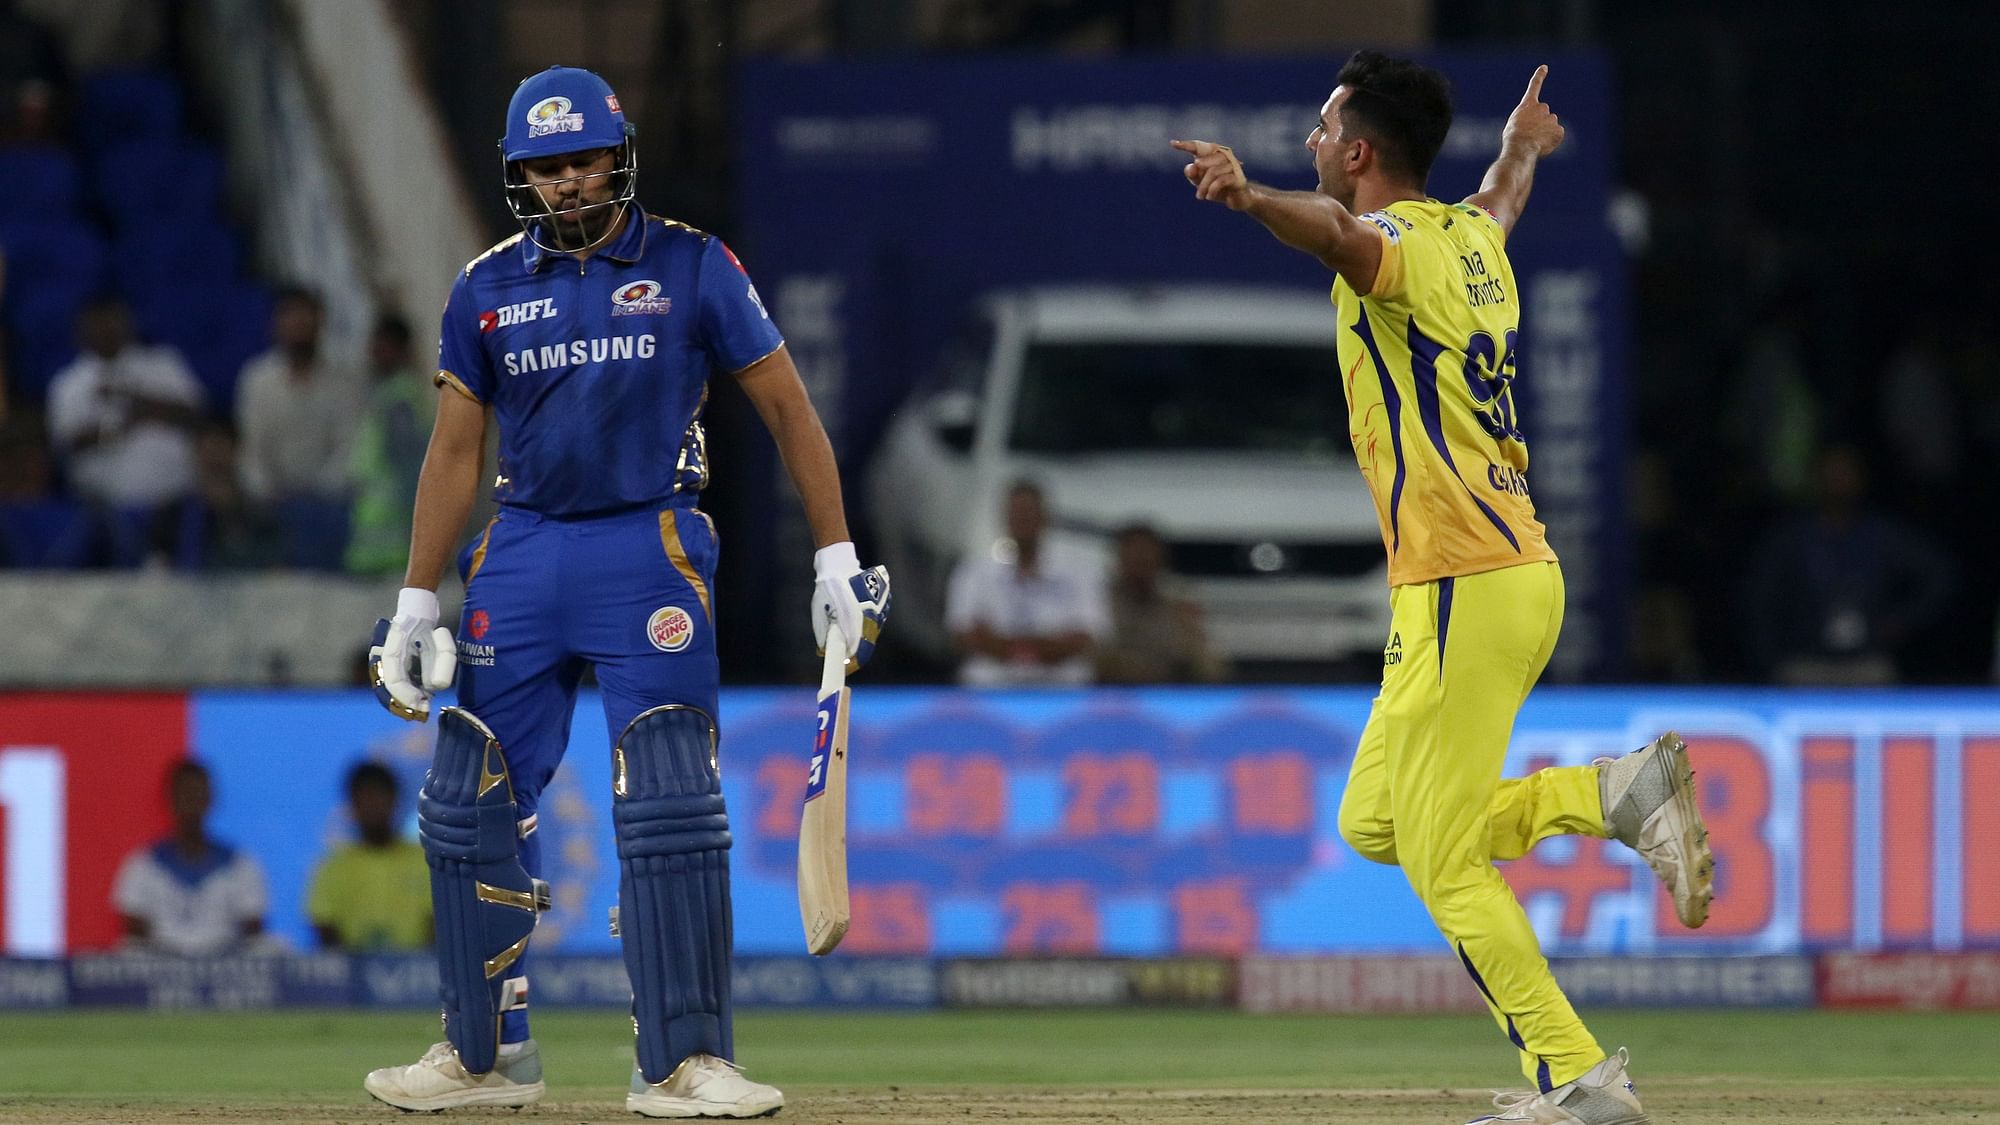 Deepak Chahar was the wrecker-in-chief for Chennai Super Kings as he picked up 3 for 26.